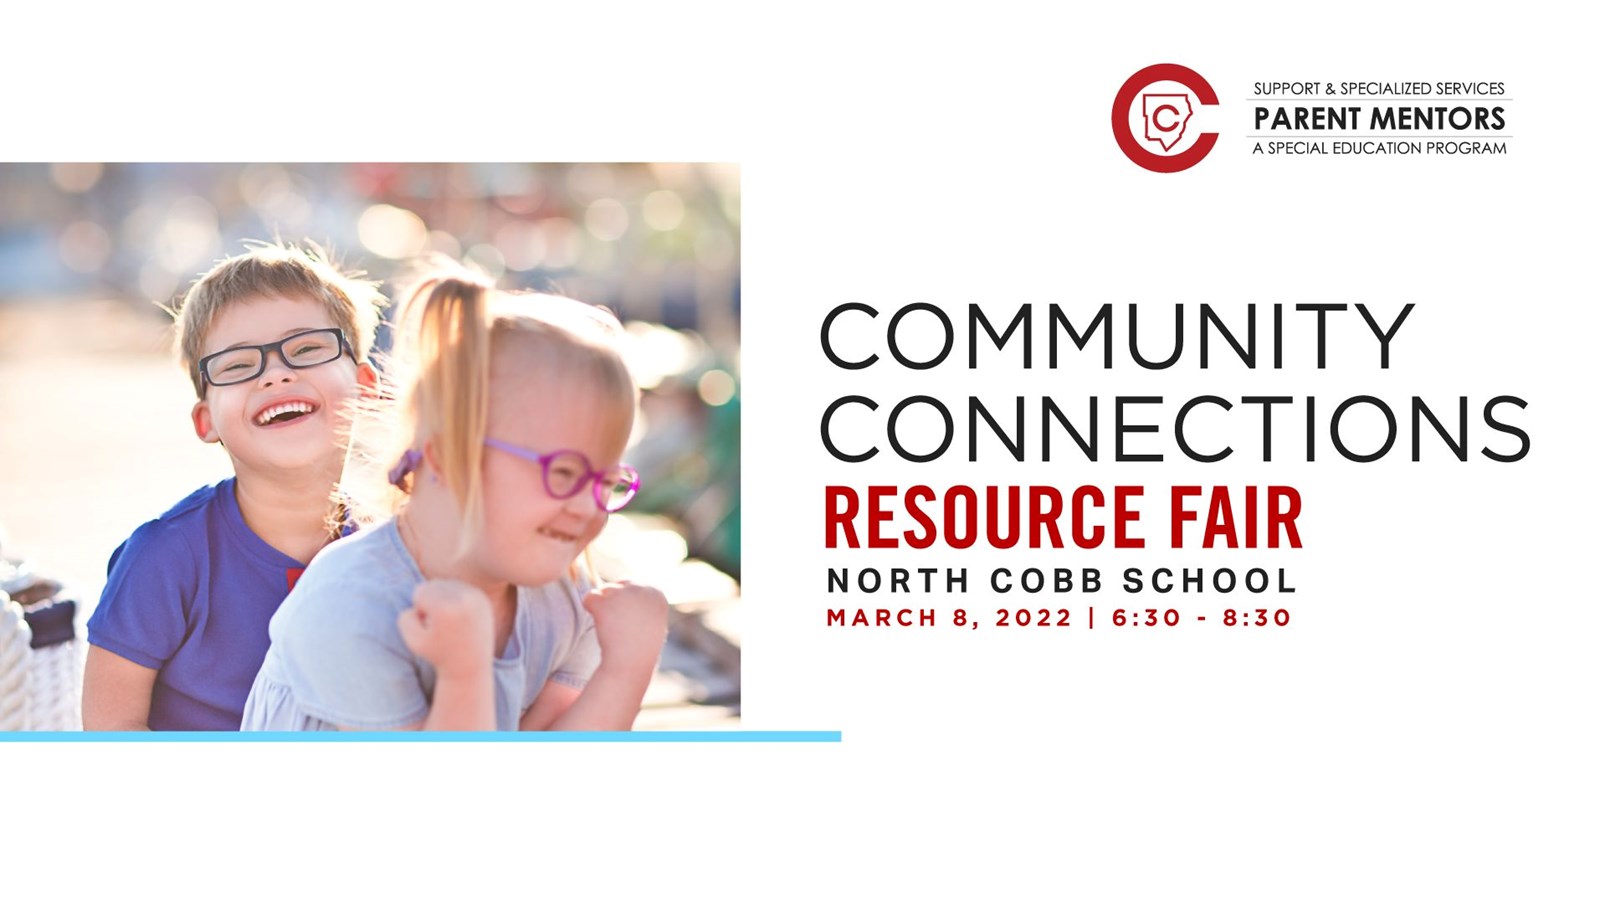 Community Connections Resource Fair takes place March 8